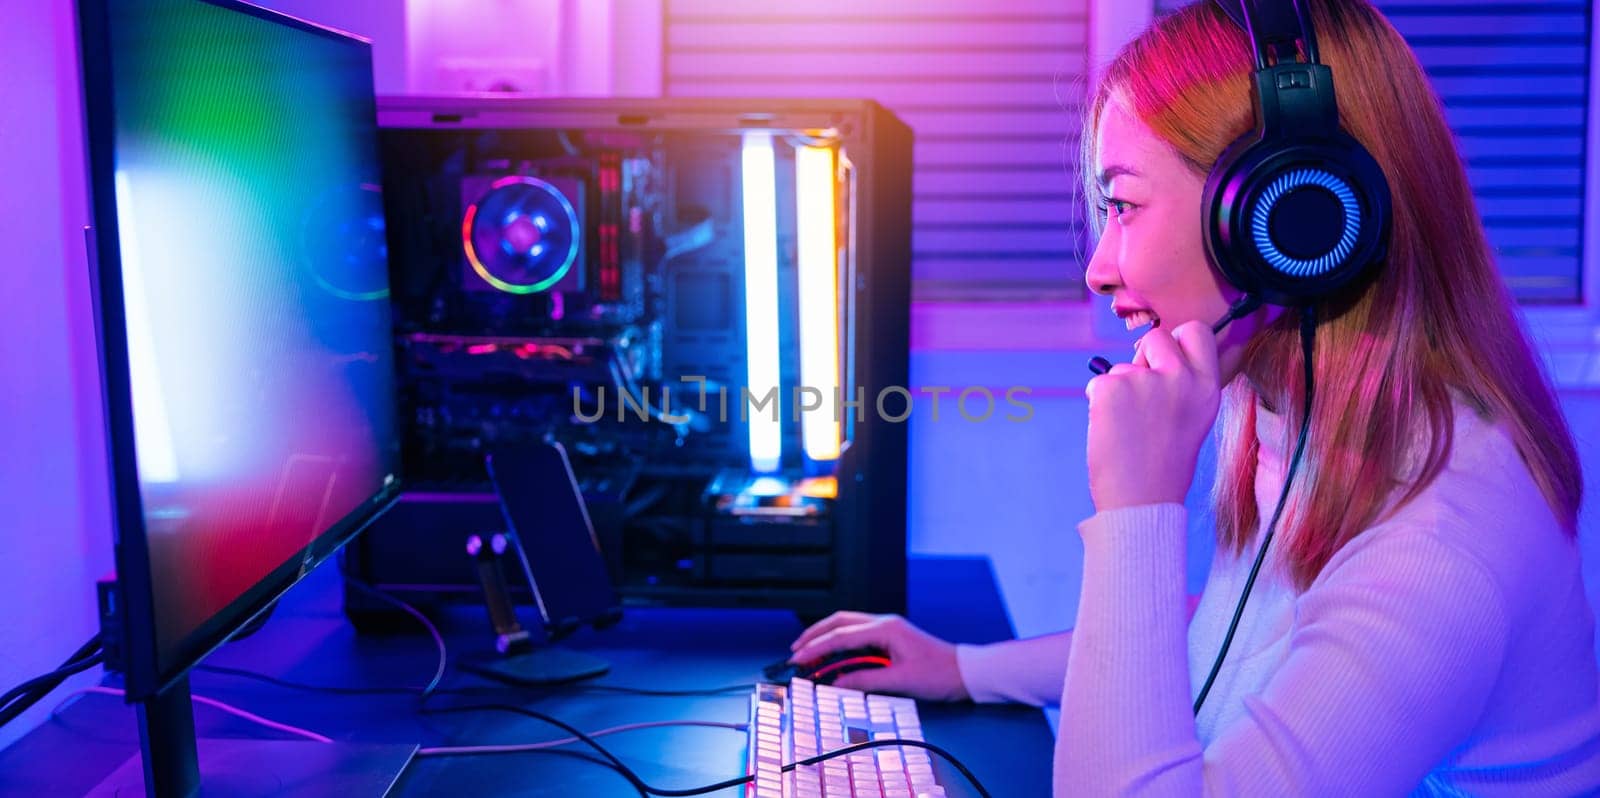 Happy Gamer endeavor plays online video games tournament with computer neon lights, young woman wearing gaming headphones intend to do playing live stream games online at home